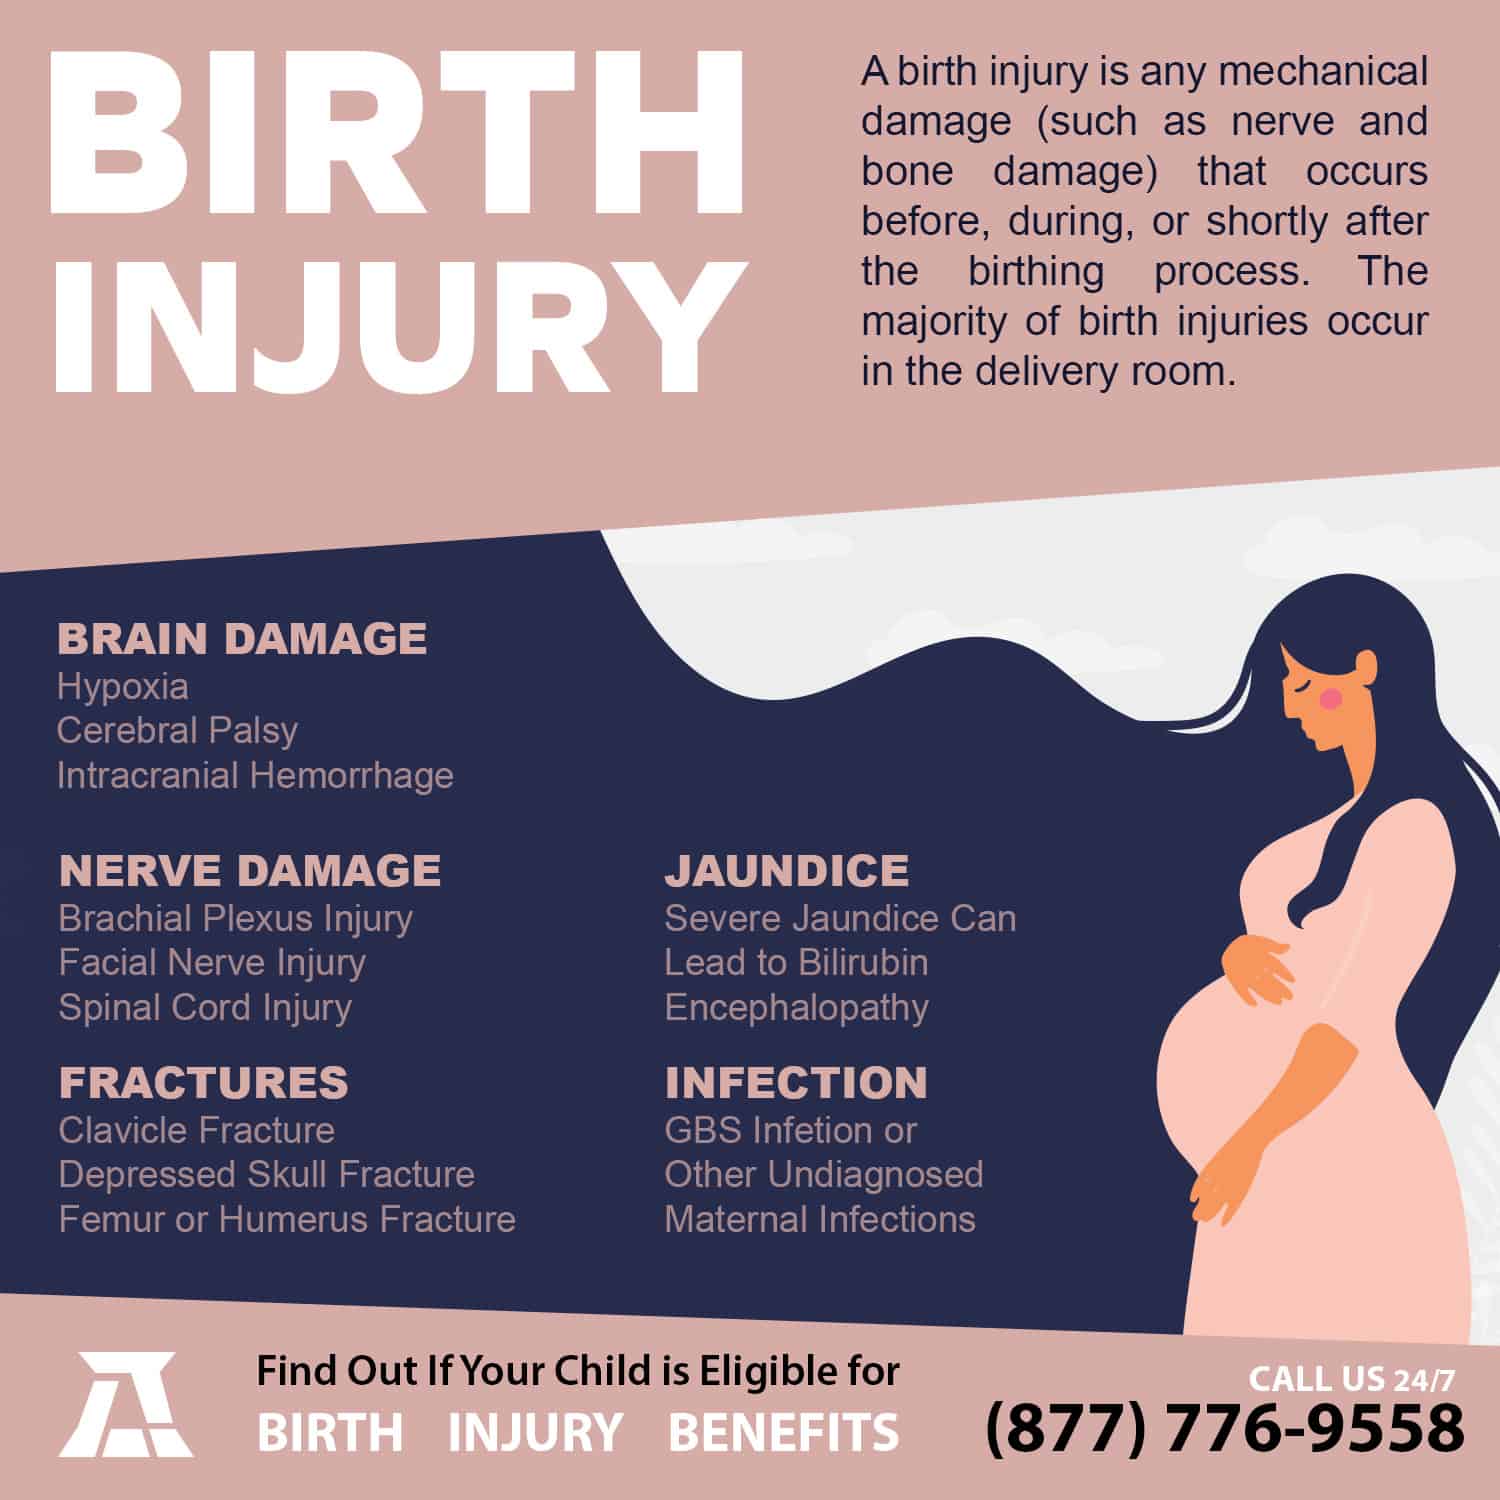 A birth injury is any mechanical damage (such as nerve and bone damage) that occurs before, during, or shortly after the birthing process. The majority of birth injuries occur in the delivery room.